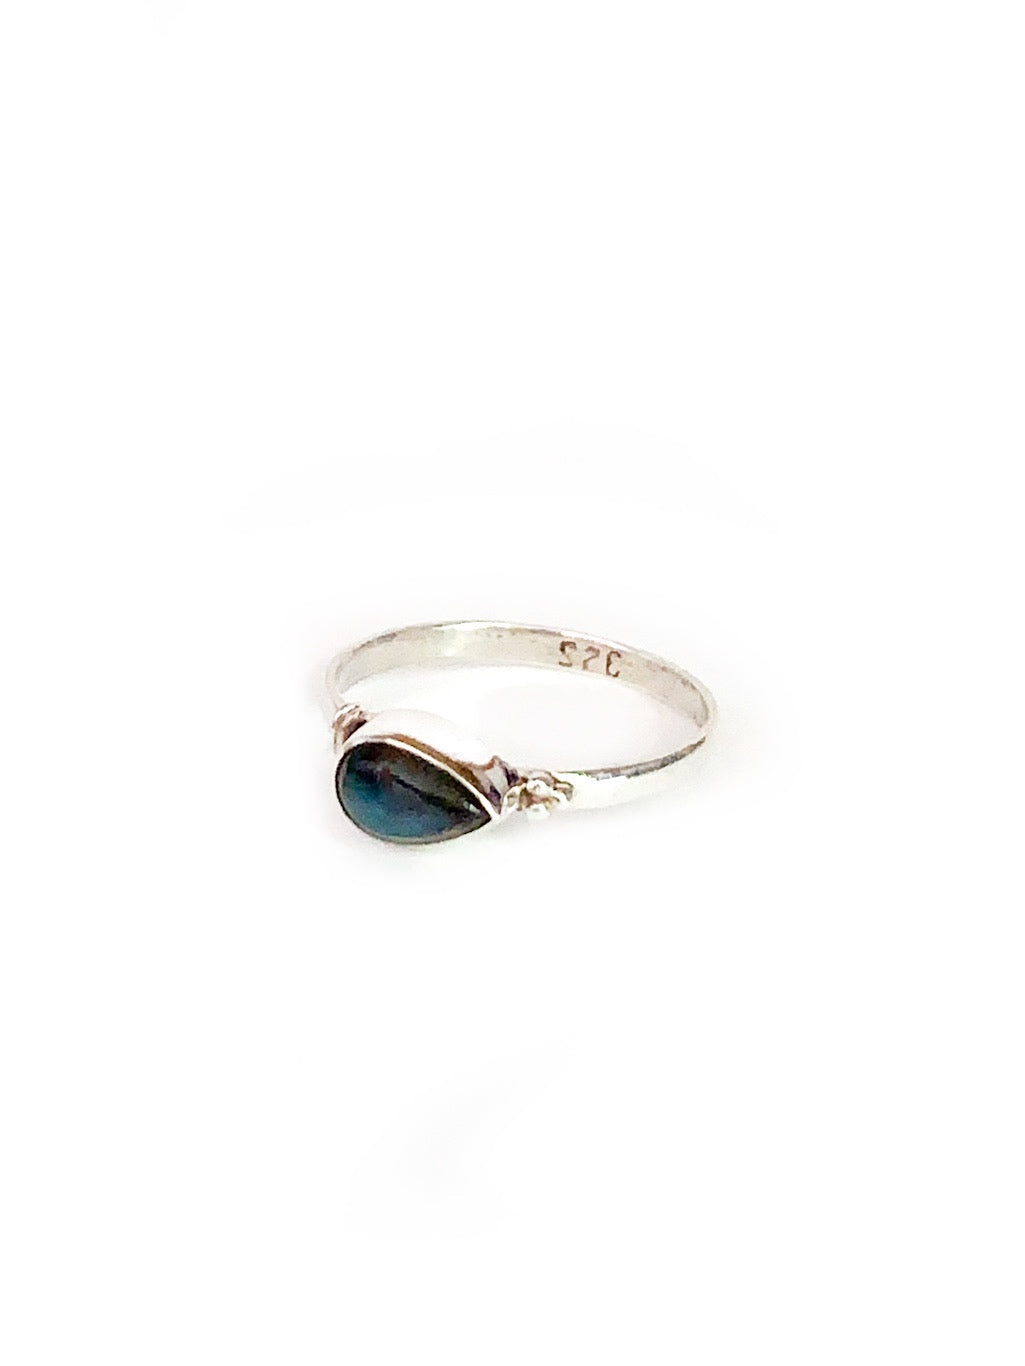 TEARDROP SHAPED SILVER RING - VARIOUS CRYSTAL OPTIONS